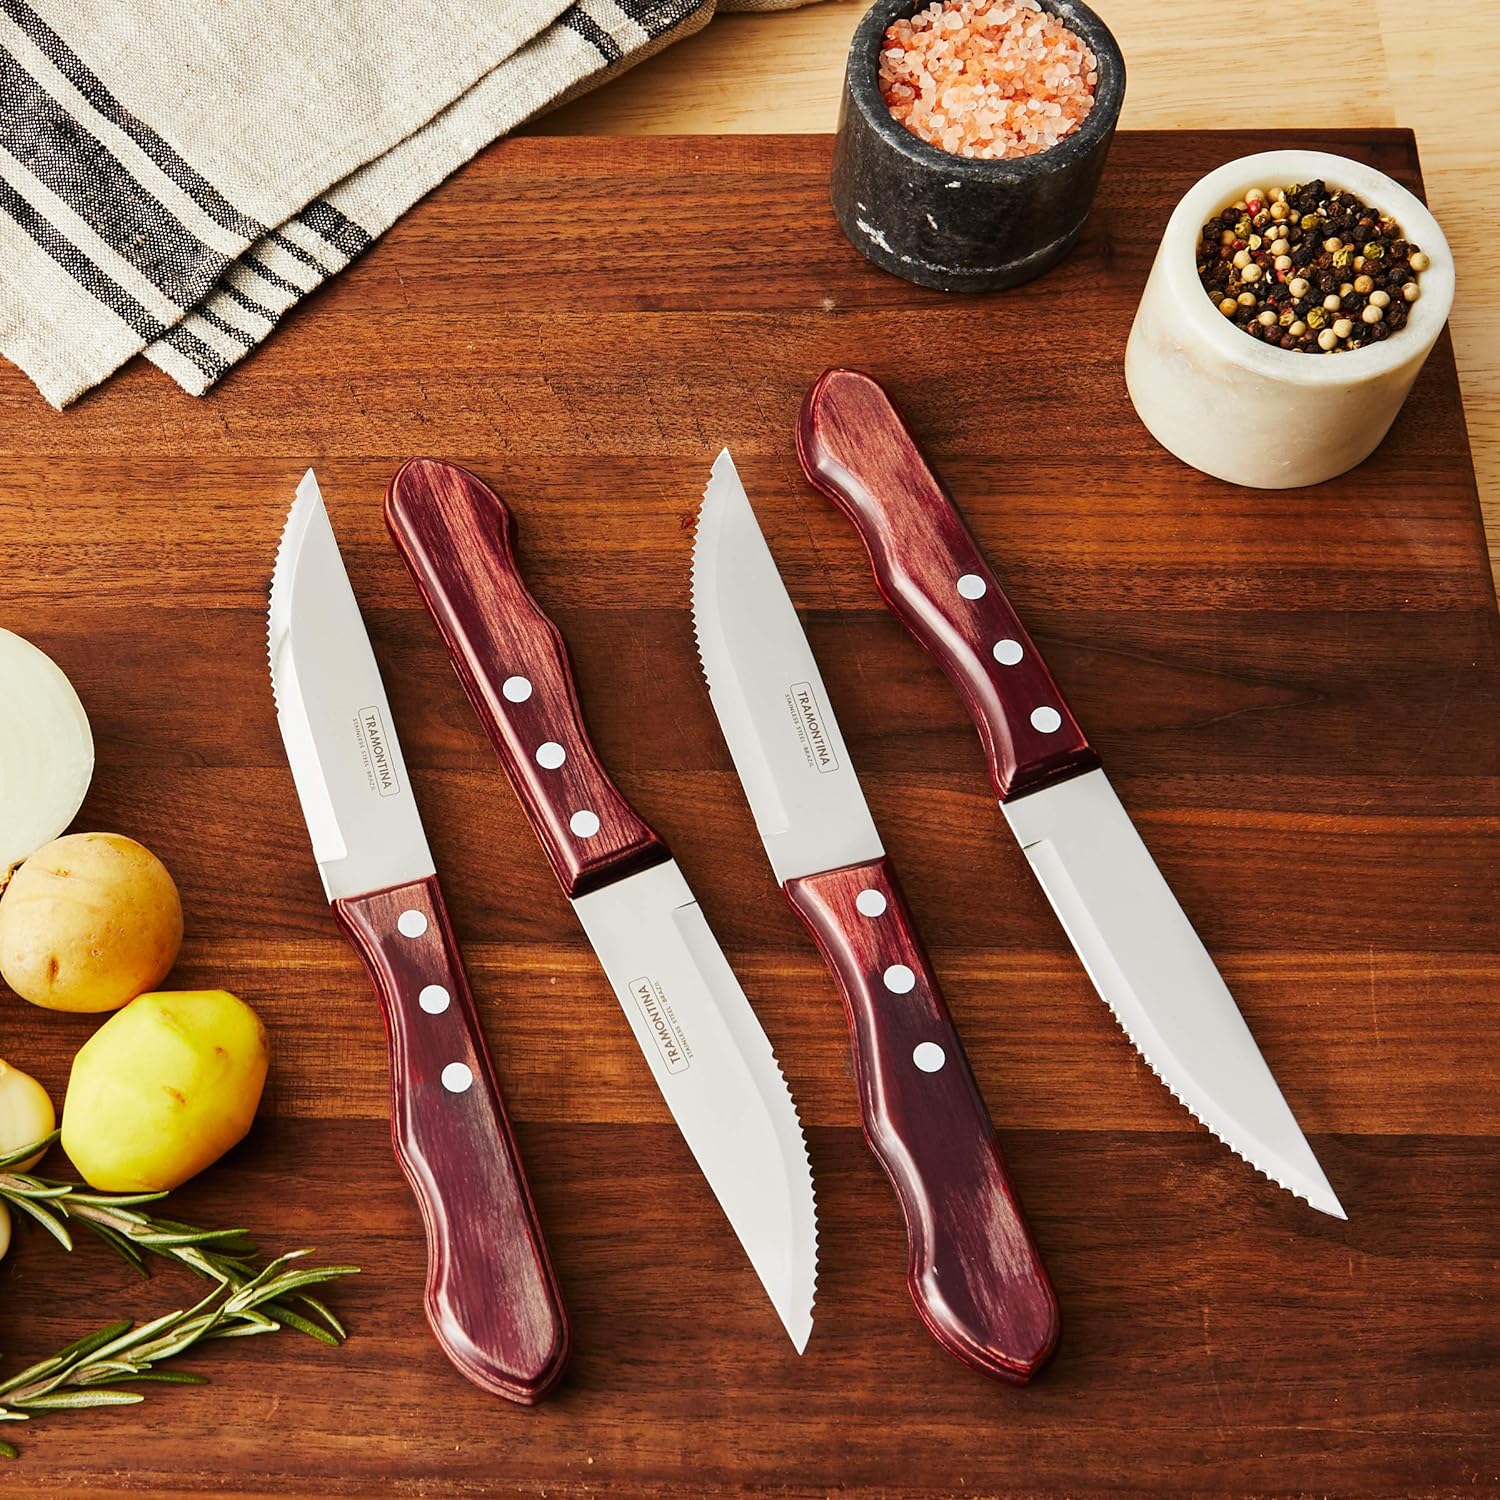 Tramontina P-500DS Porterhouse Stainless Steel 4-Piece Steak Knife Set, Rounded Tip, Polywood Handle, Made in Brazil